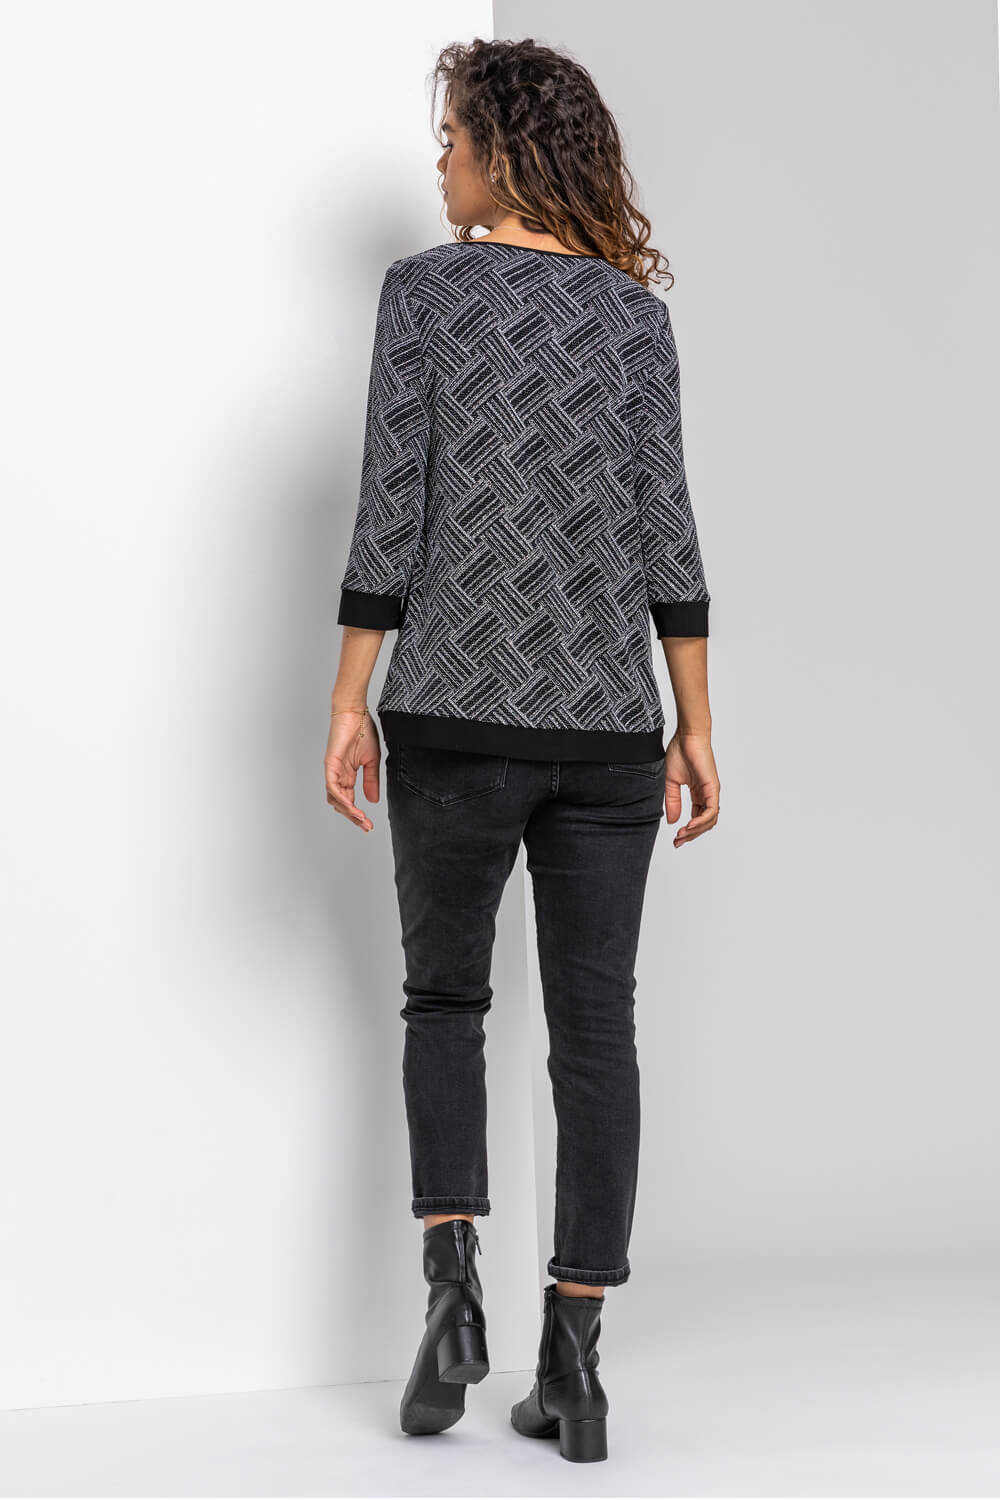 Silver Shimmer Geo Print Asymmetrical Top, Image 2 of 4